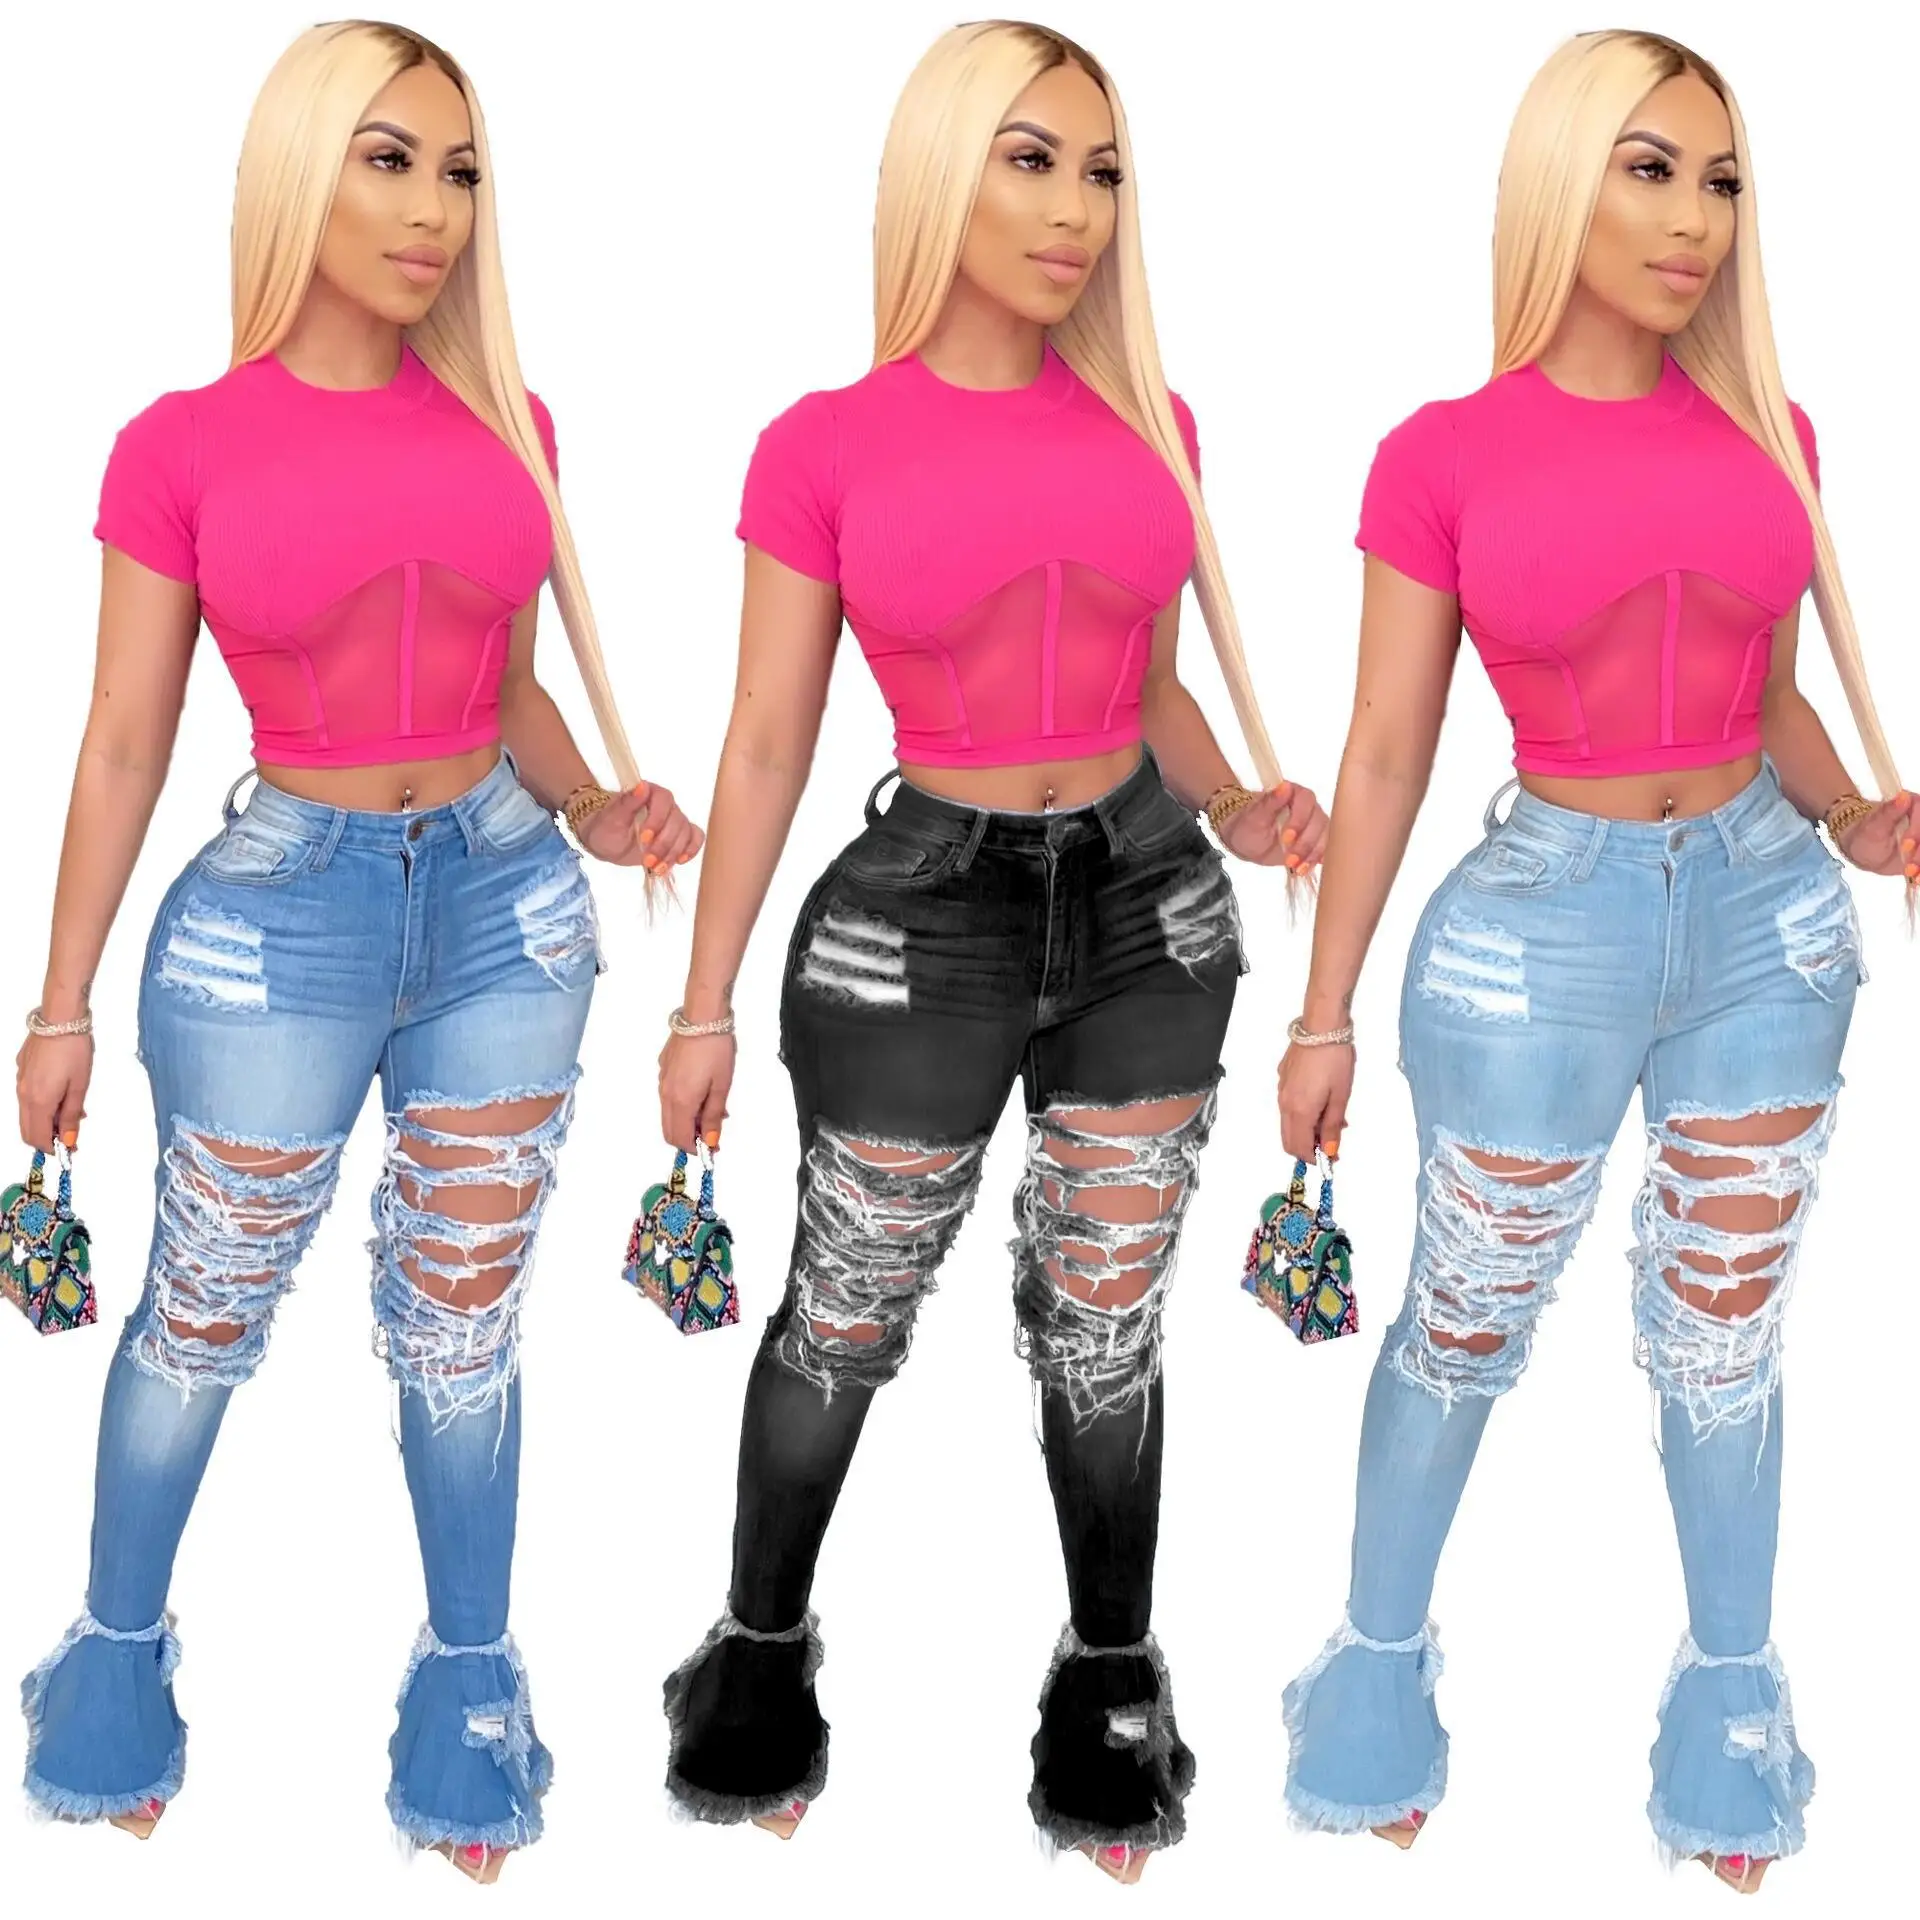 

Hot Sale Plus Size Bell Bottom Jeans High Waist Ripped Jeans Women Washed Flare Denim Jeans, Blue